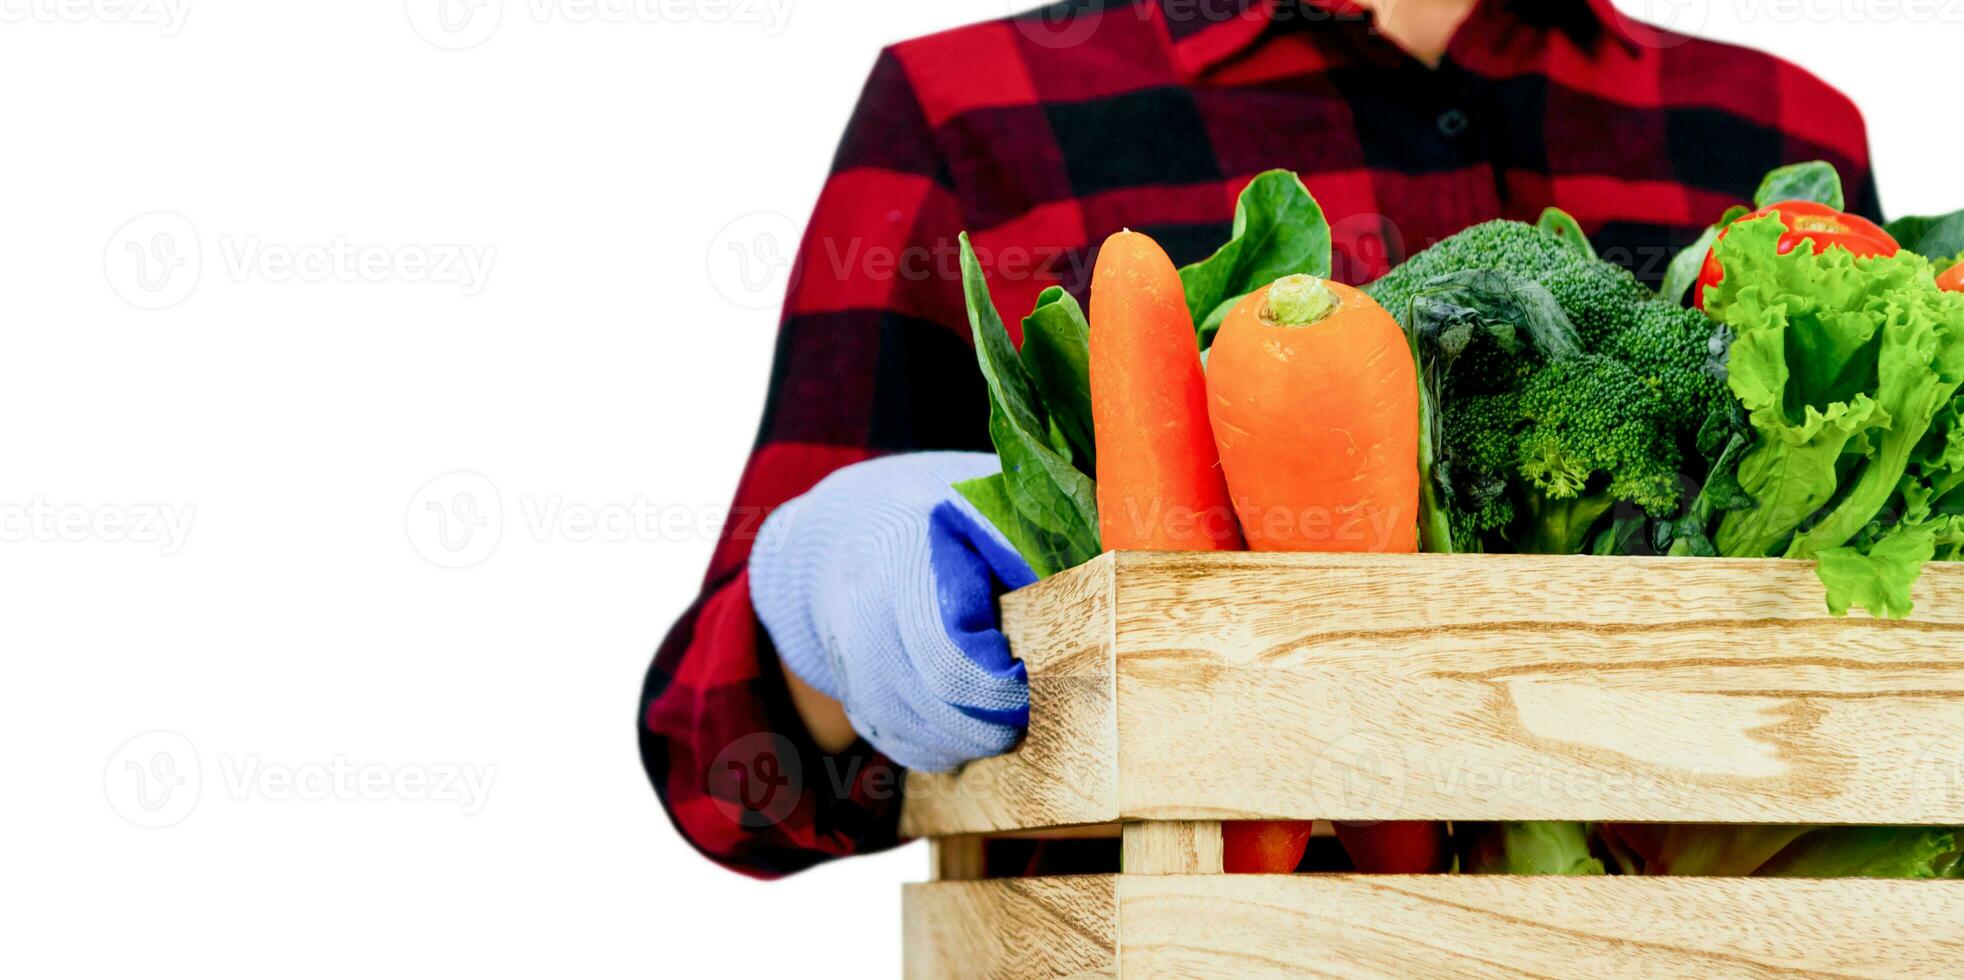 Gardener vegetables hold in wooden crate radish, tomato, carrot, chinese cabbage, broccoli, bitter gourd, chinese kale on a white background photo